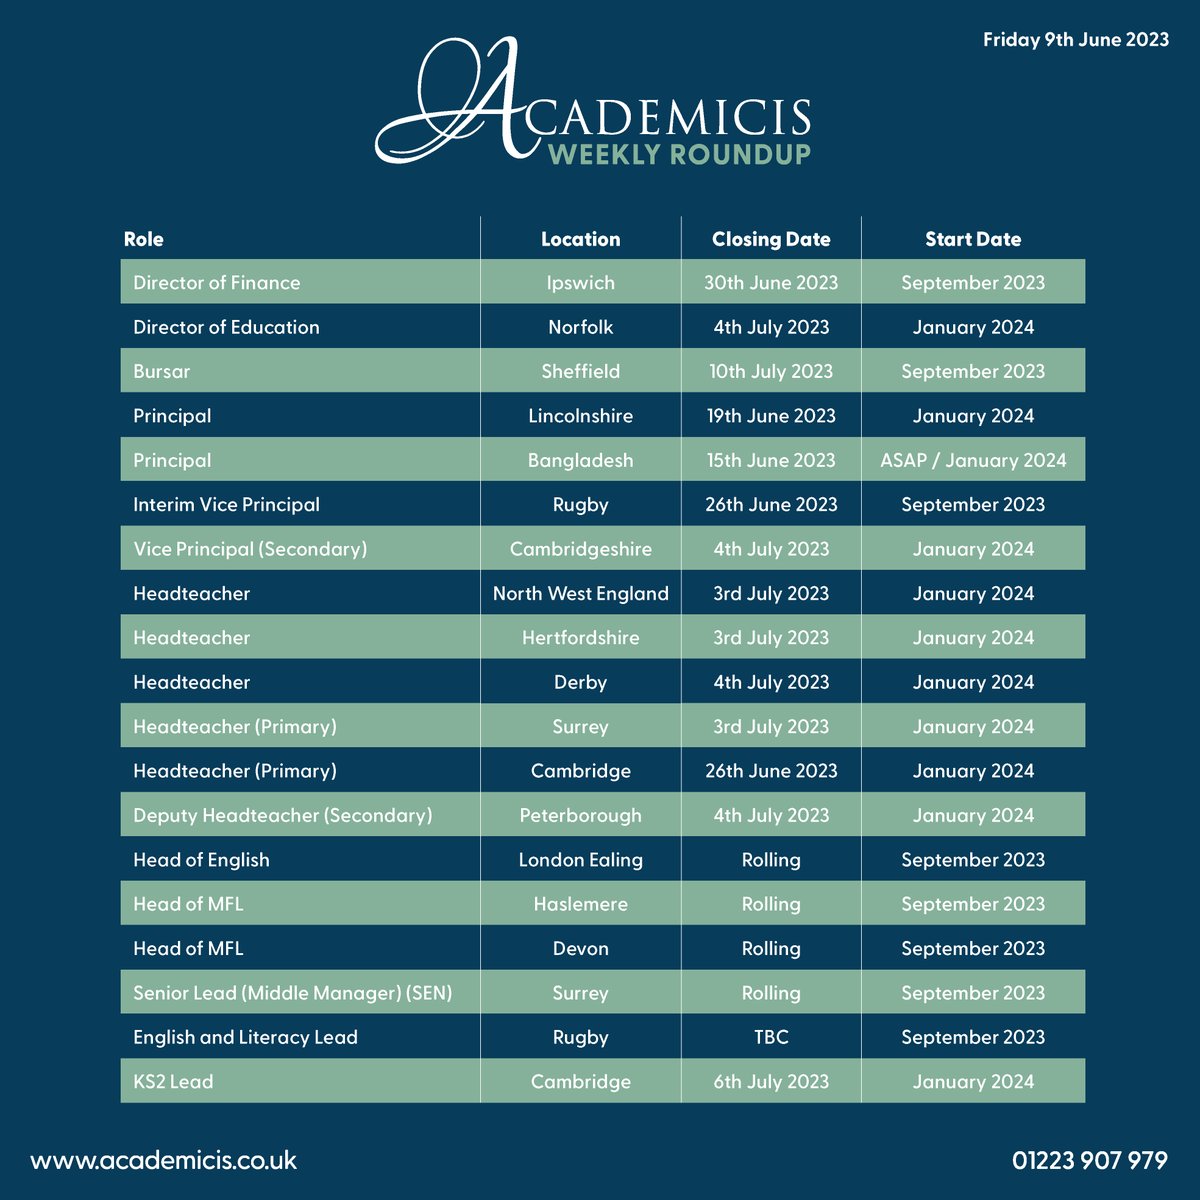 📆 New Roles added to this week's 'Academicis Weekly Roundup'.  

Please call 01223 907979 or visit ow.ly/JPlx50Nr99H for more information or to apply. 

#Education #School #EducationRecruitment #DeputyHeadteacher #Head #Headteacher #Careers #NewJob #NewRoles #SeniorLeader